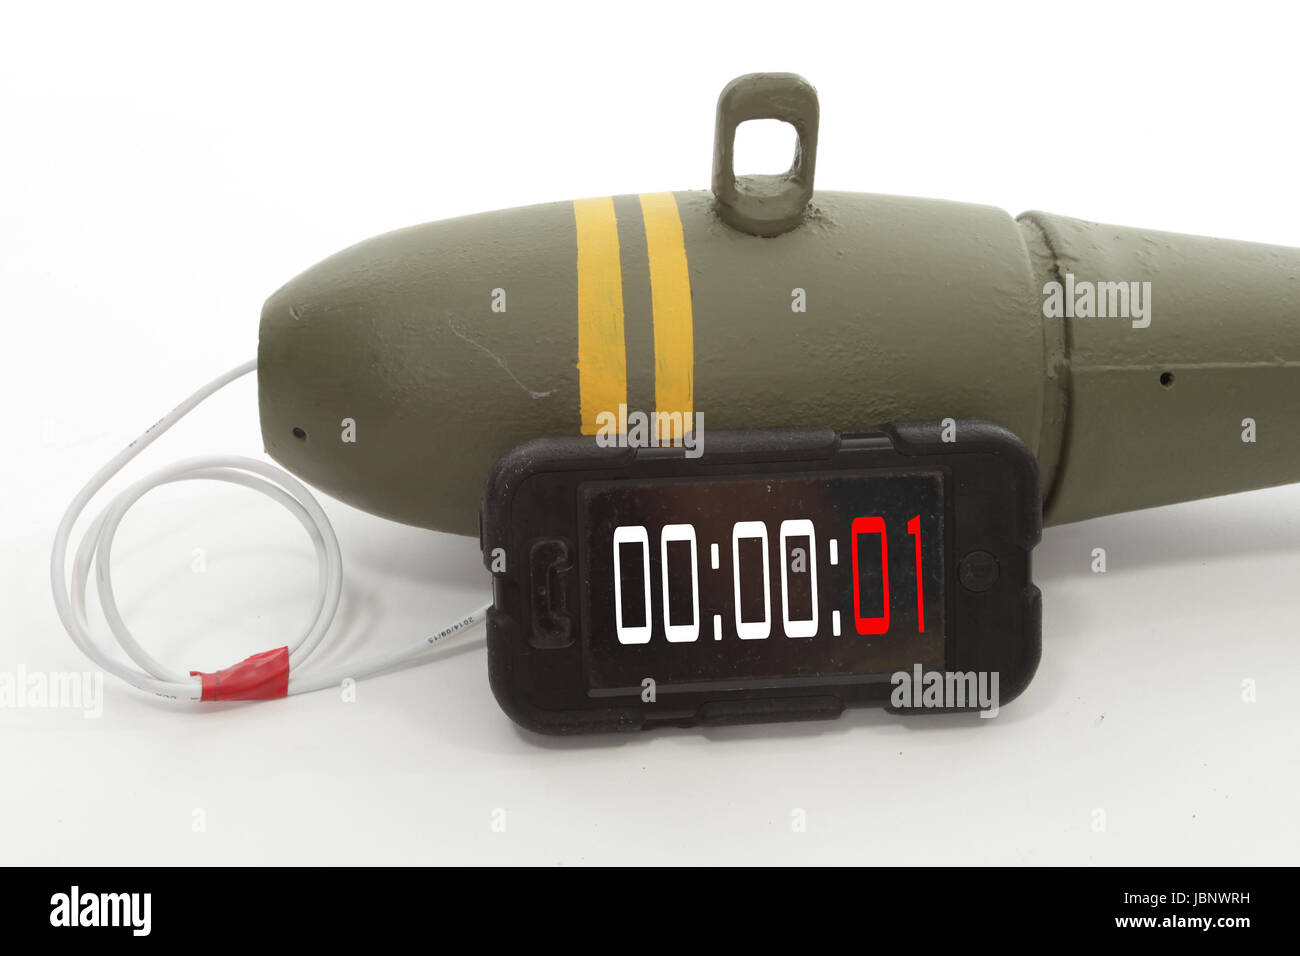 Improvised explosive device, IED, bomb wired to mobile phone, Stock Photo